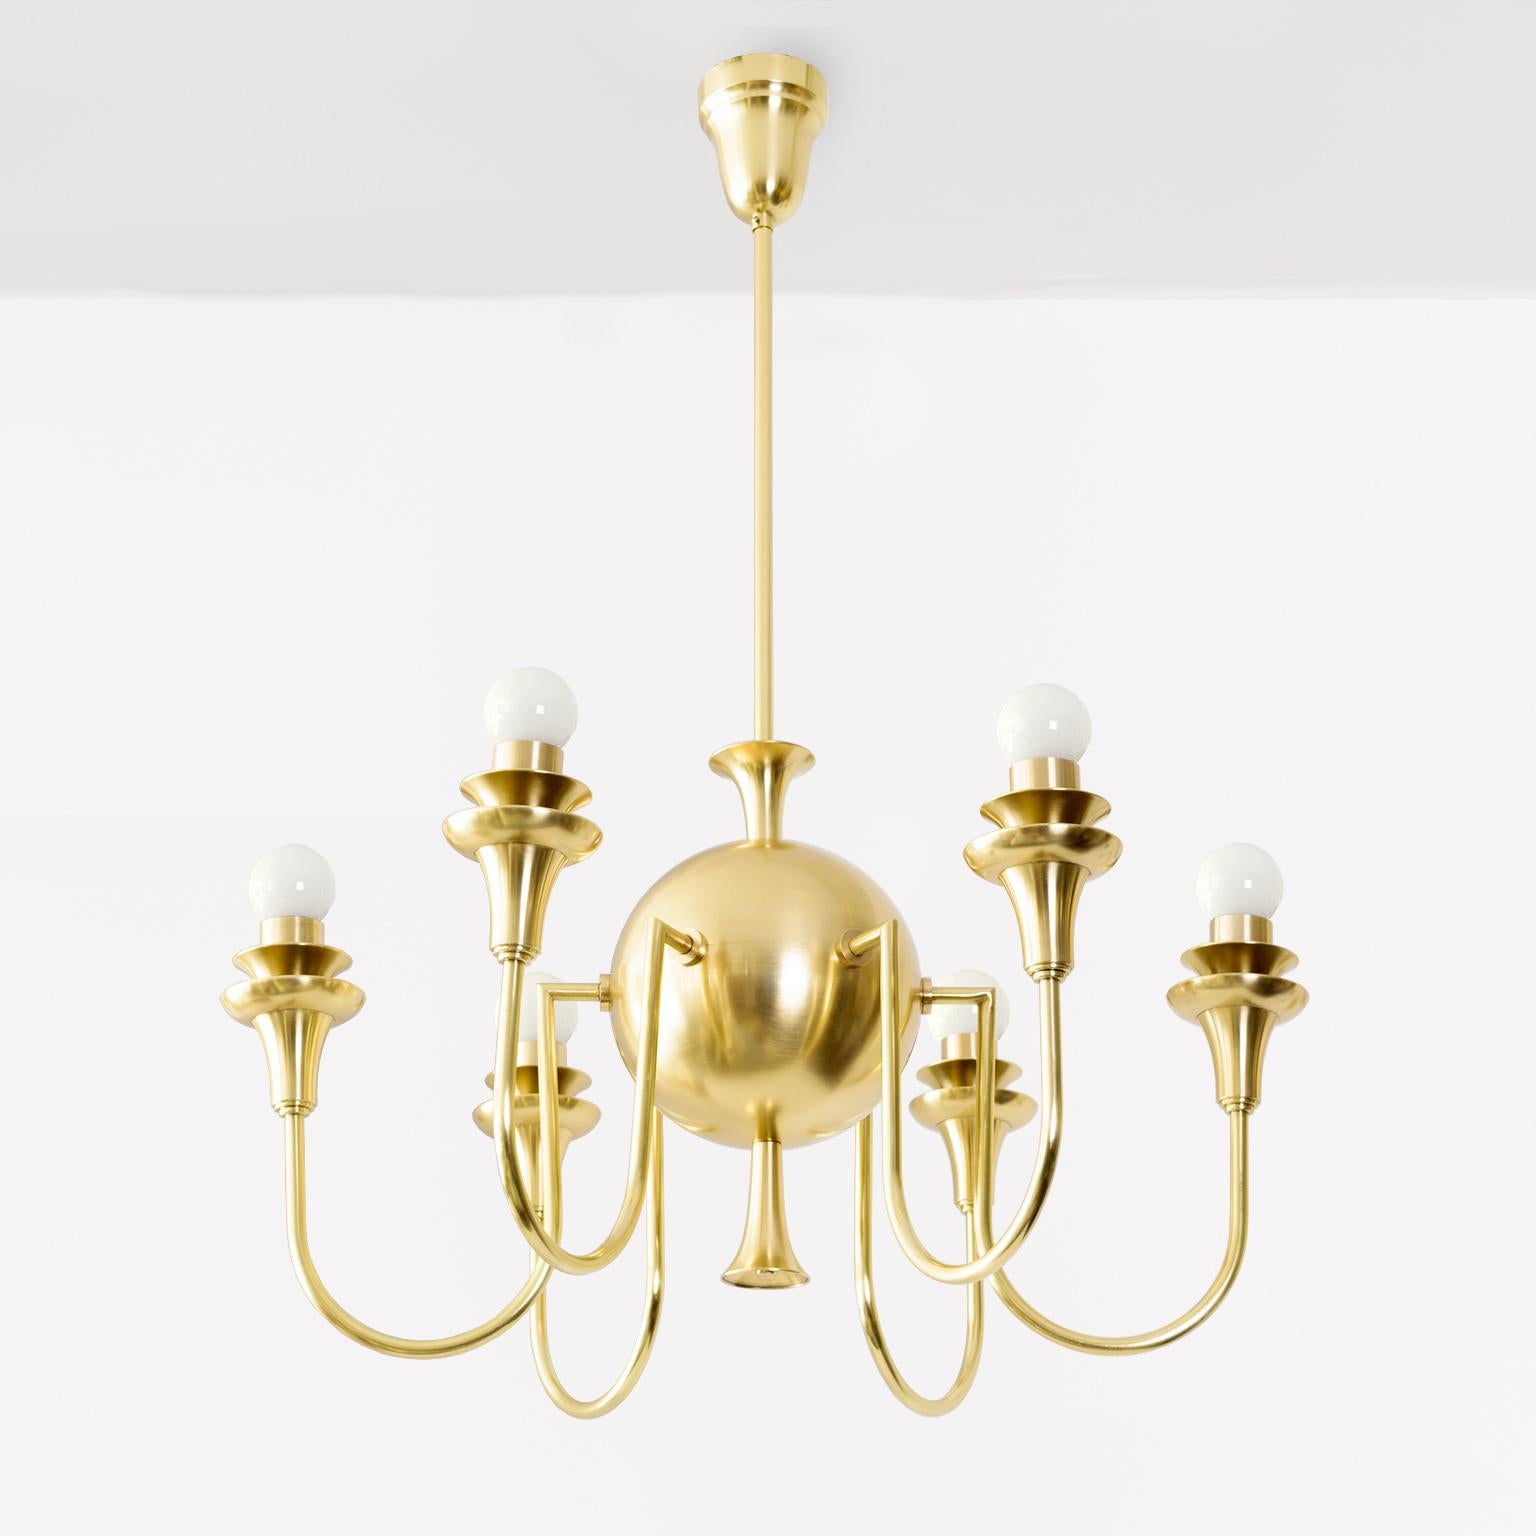 A Swedish Grace era, six-arm globe chandelier of exceptional quality and design, circa 1930. This fixture is a fine example of the era’s marriage of modernism with classicism, the results being a piece of design which embodies the best qualities of